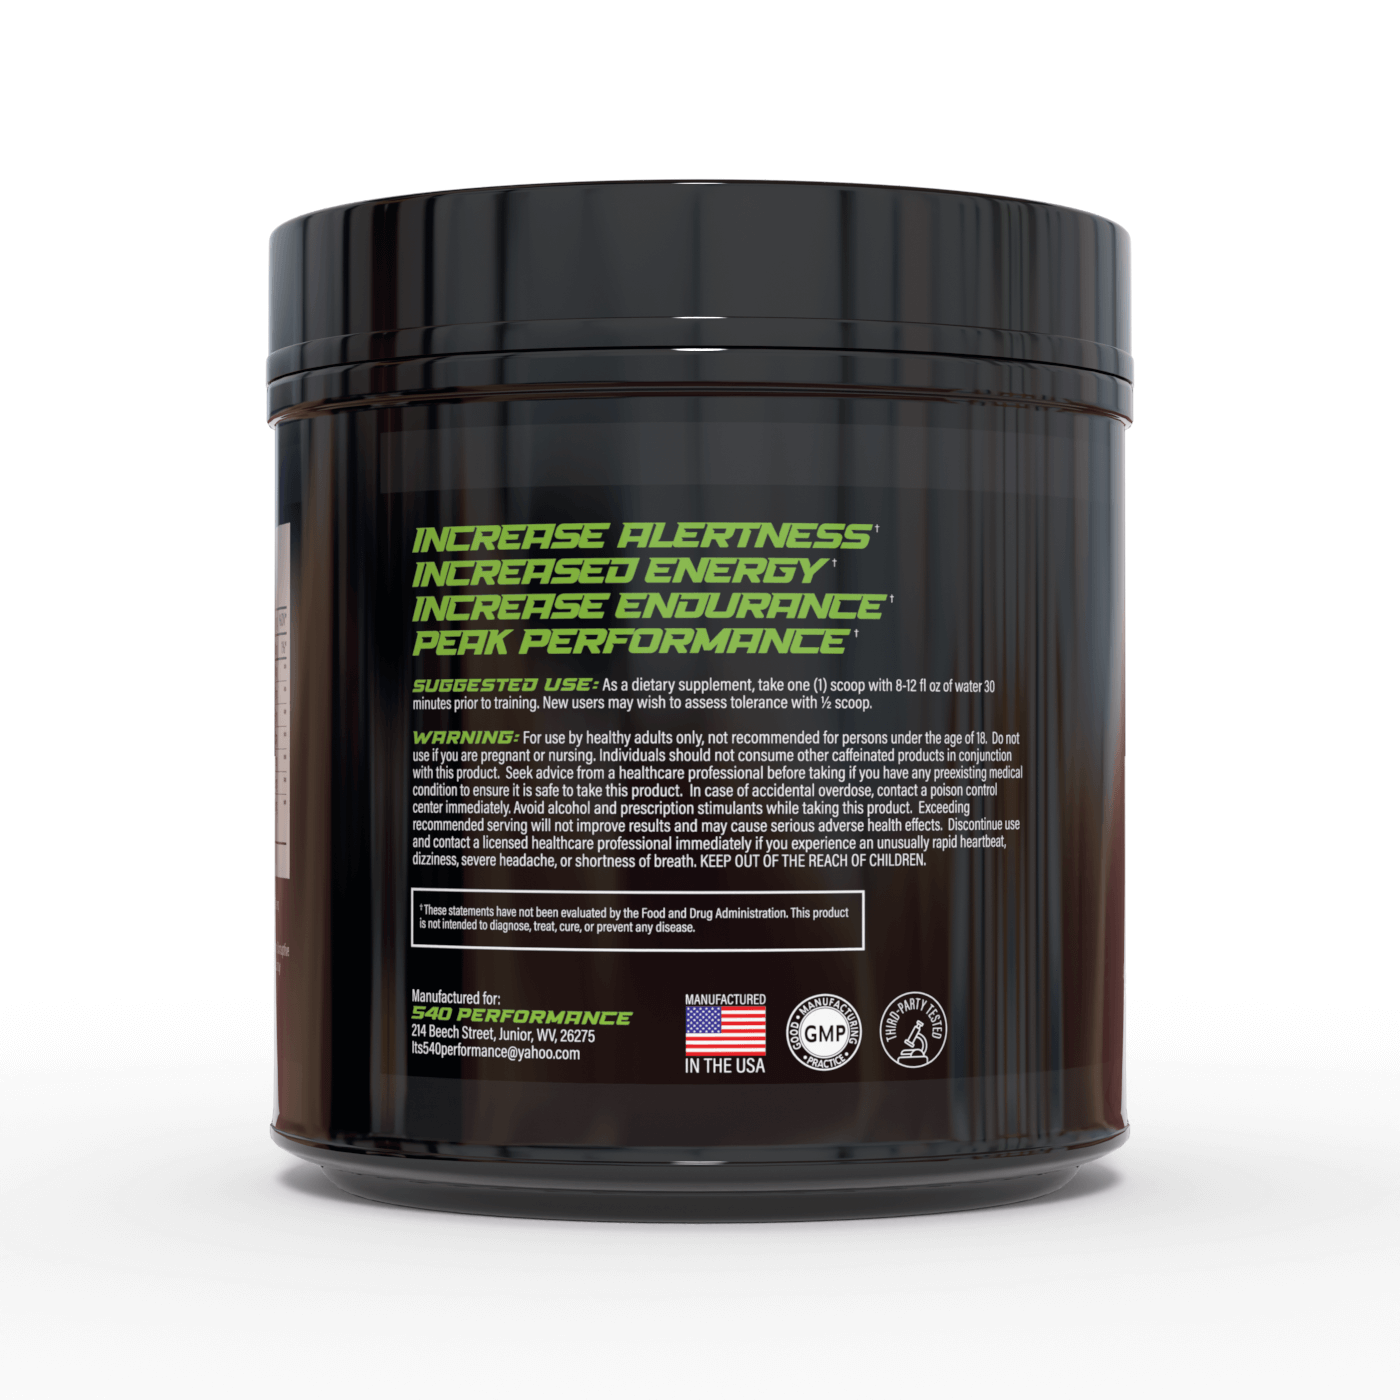  Black container “540 pre-workout” product, suggested use information